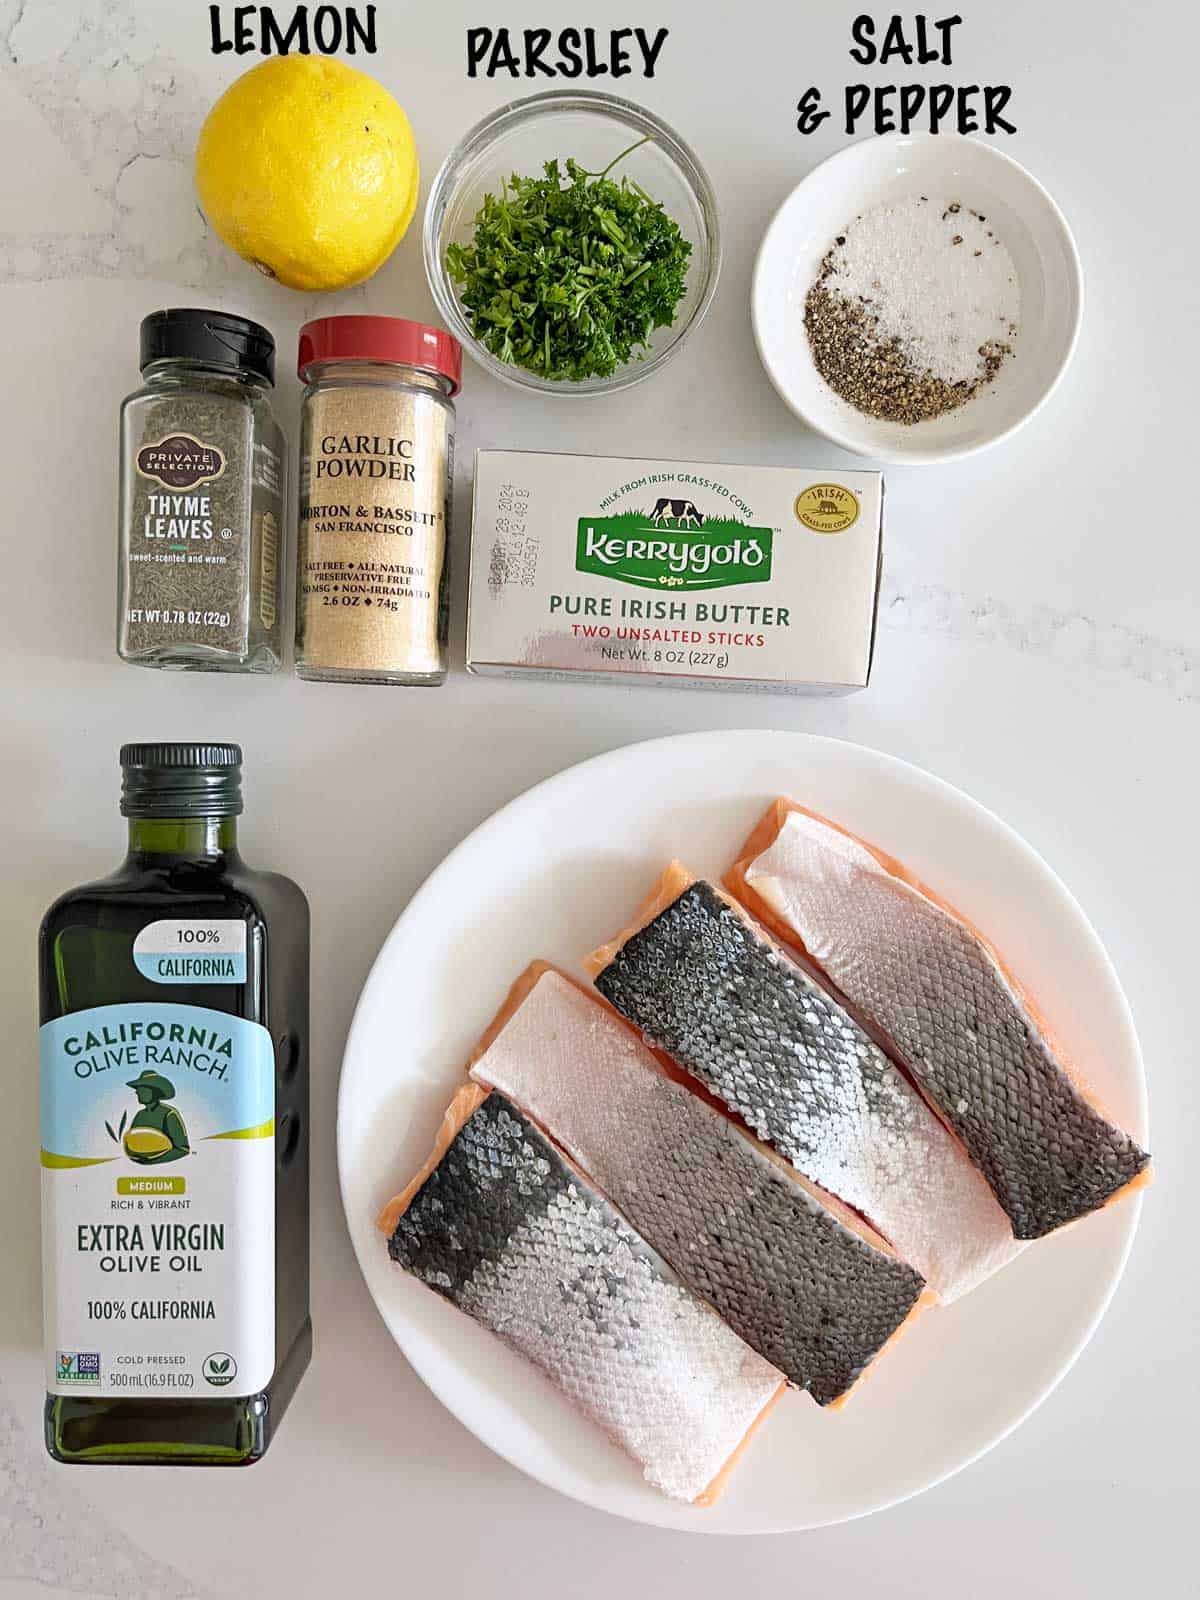 The ingredients needed to make pan-fried salmon.